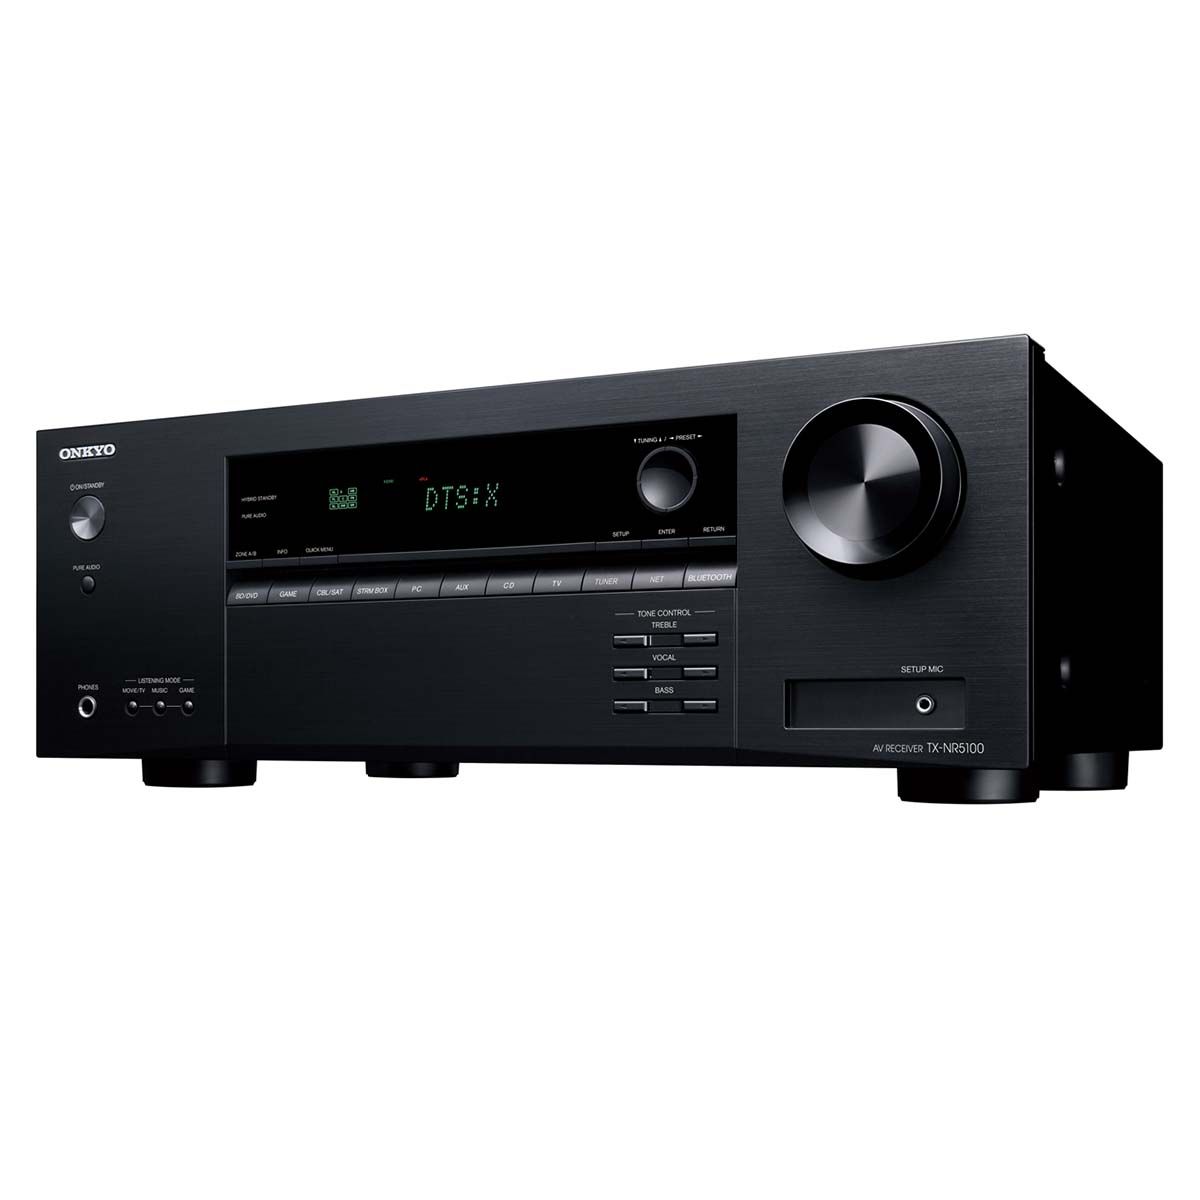 Onkyo TX-NR5100 Home Theater Receiver, front angle